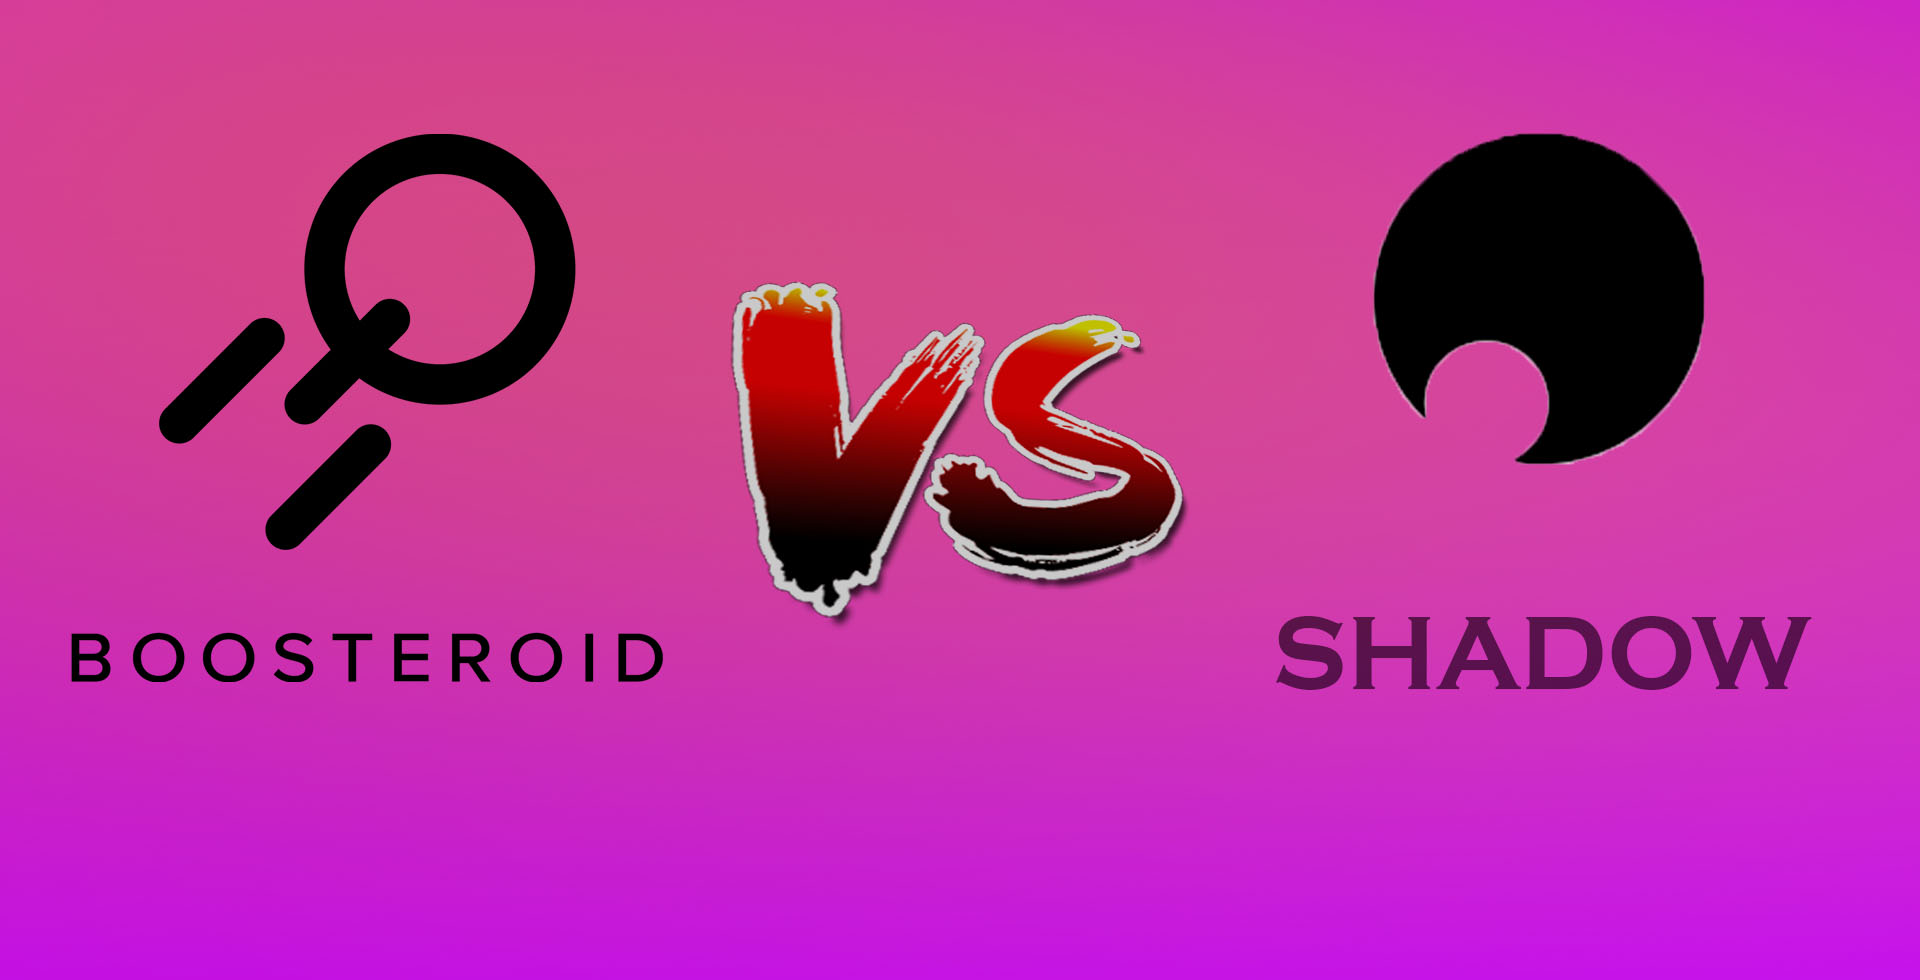 BOOSTEROID VS SHADOW Which is best Gaming Platform ?